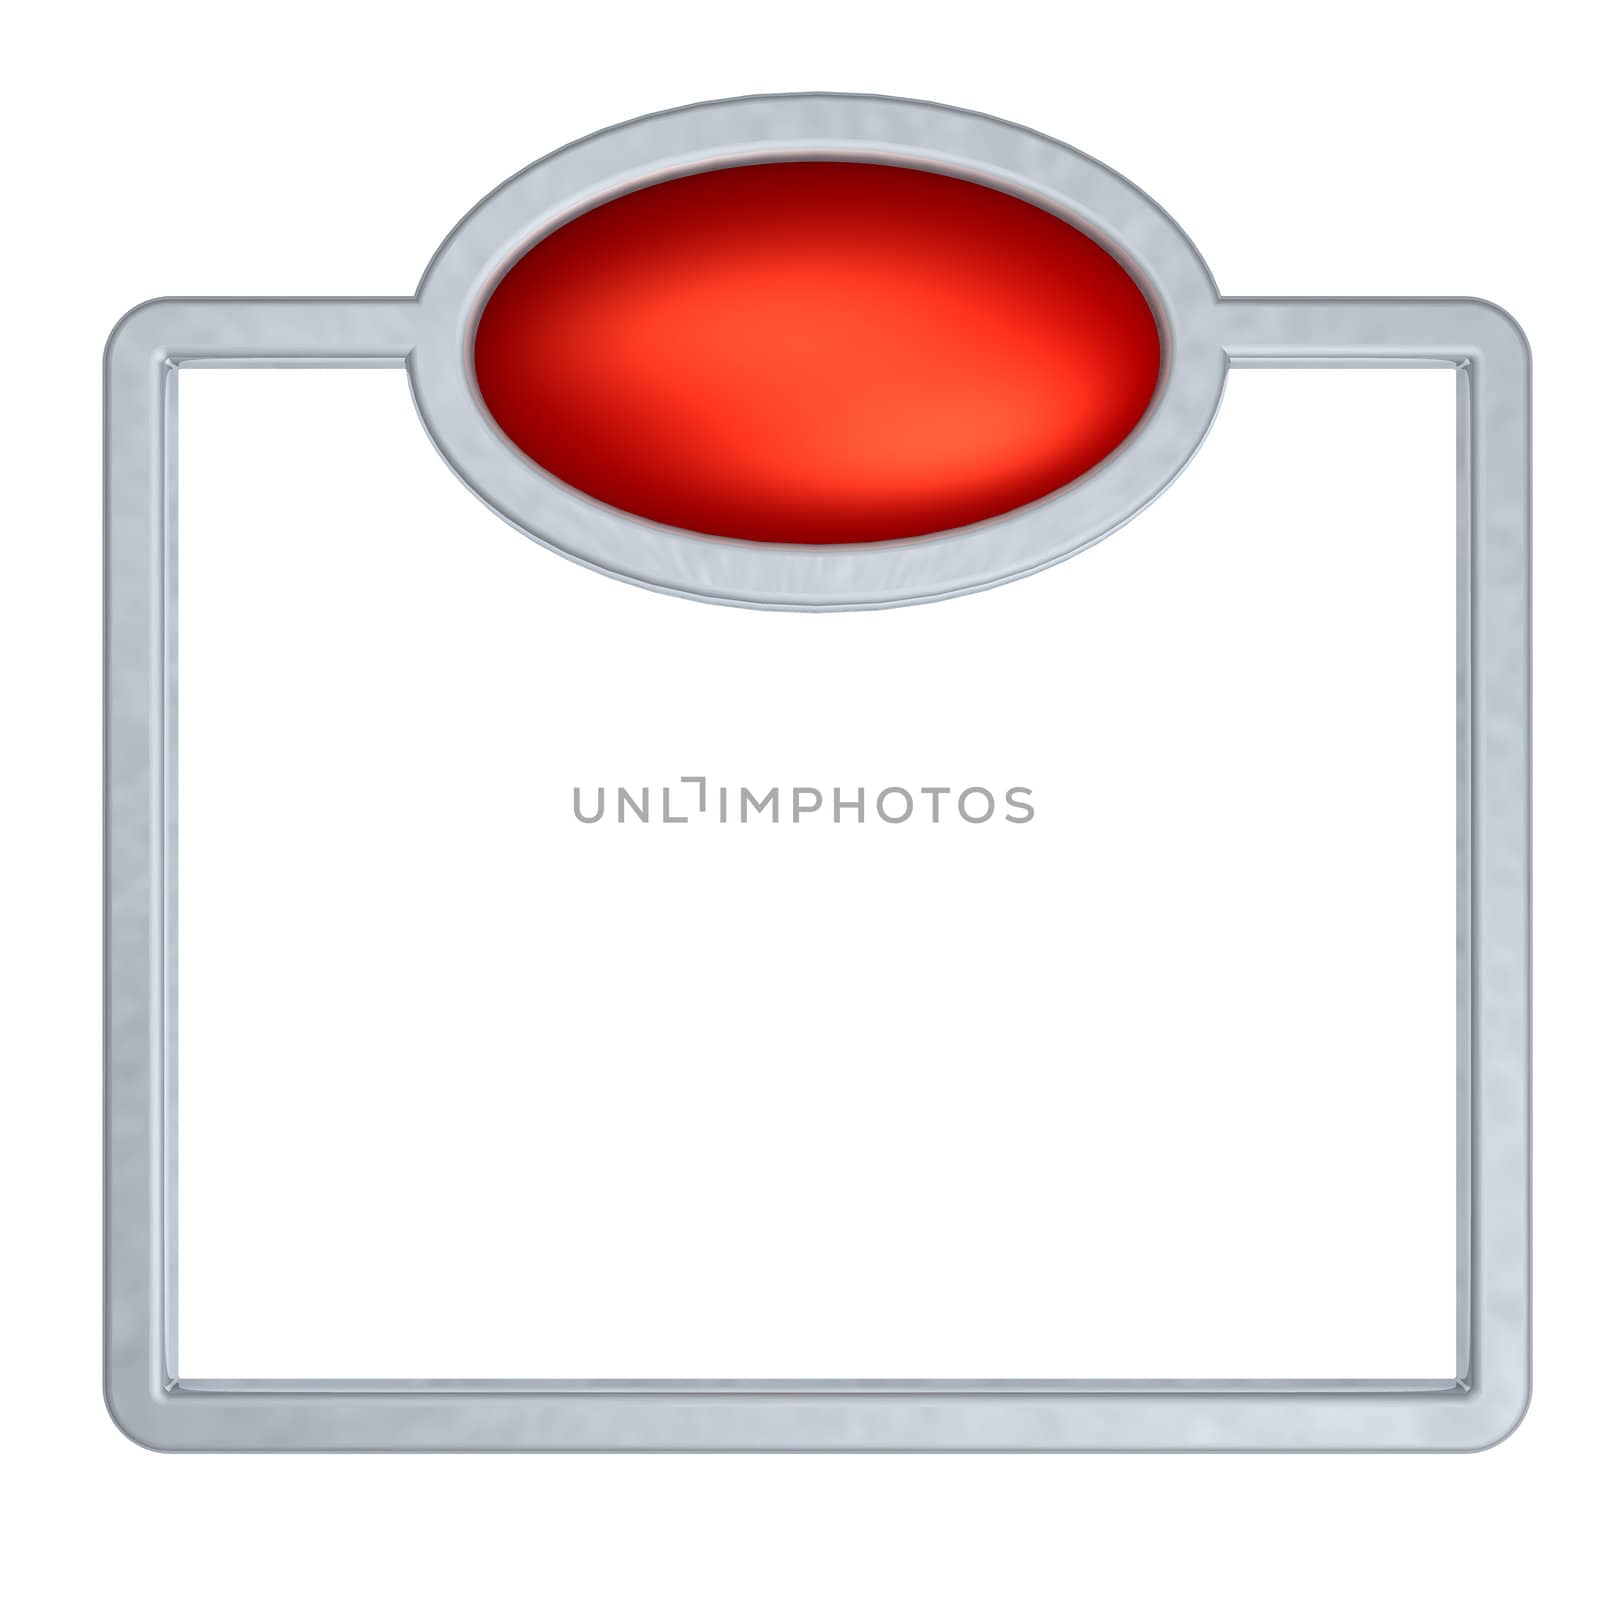 metal frame and red button on white background - 3d illustration